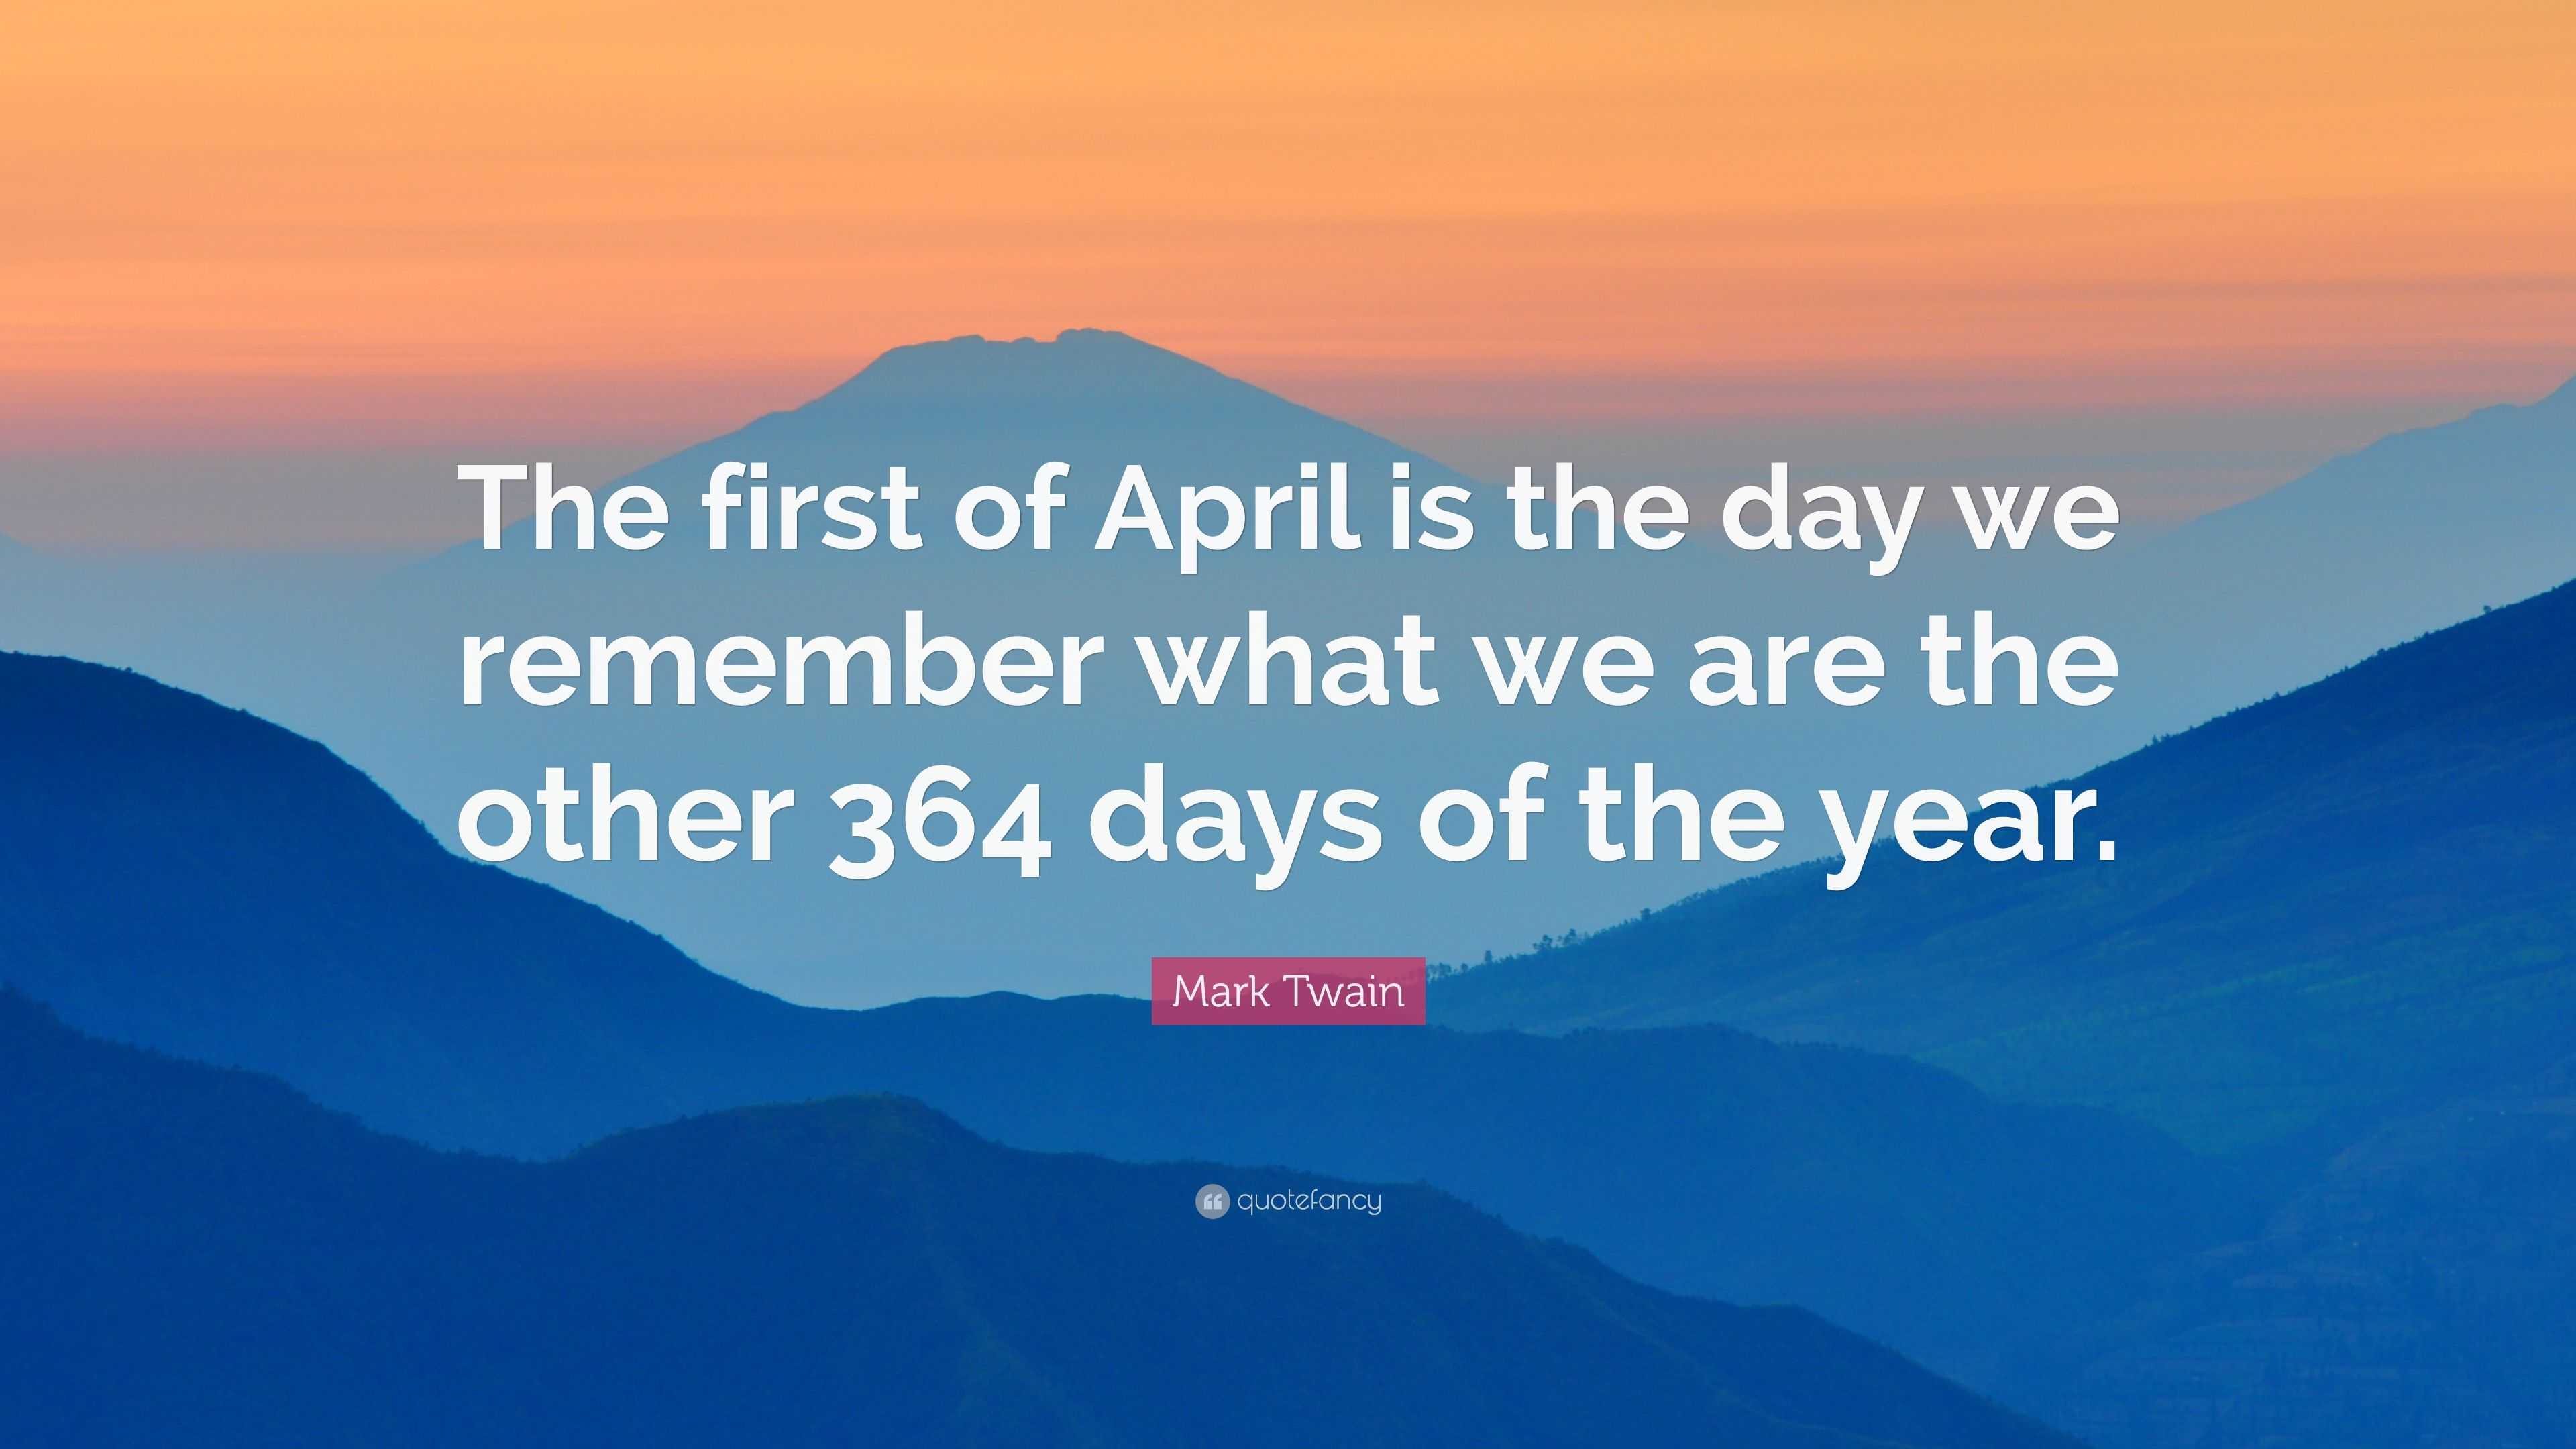 Mark Twain Quote “The first of April is the day we remember what we